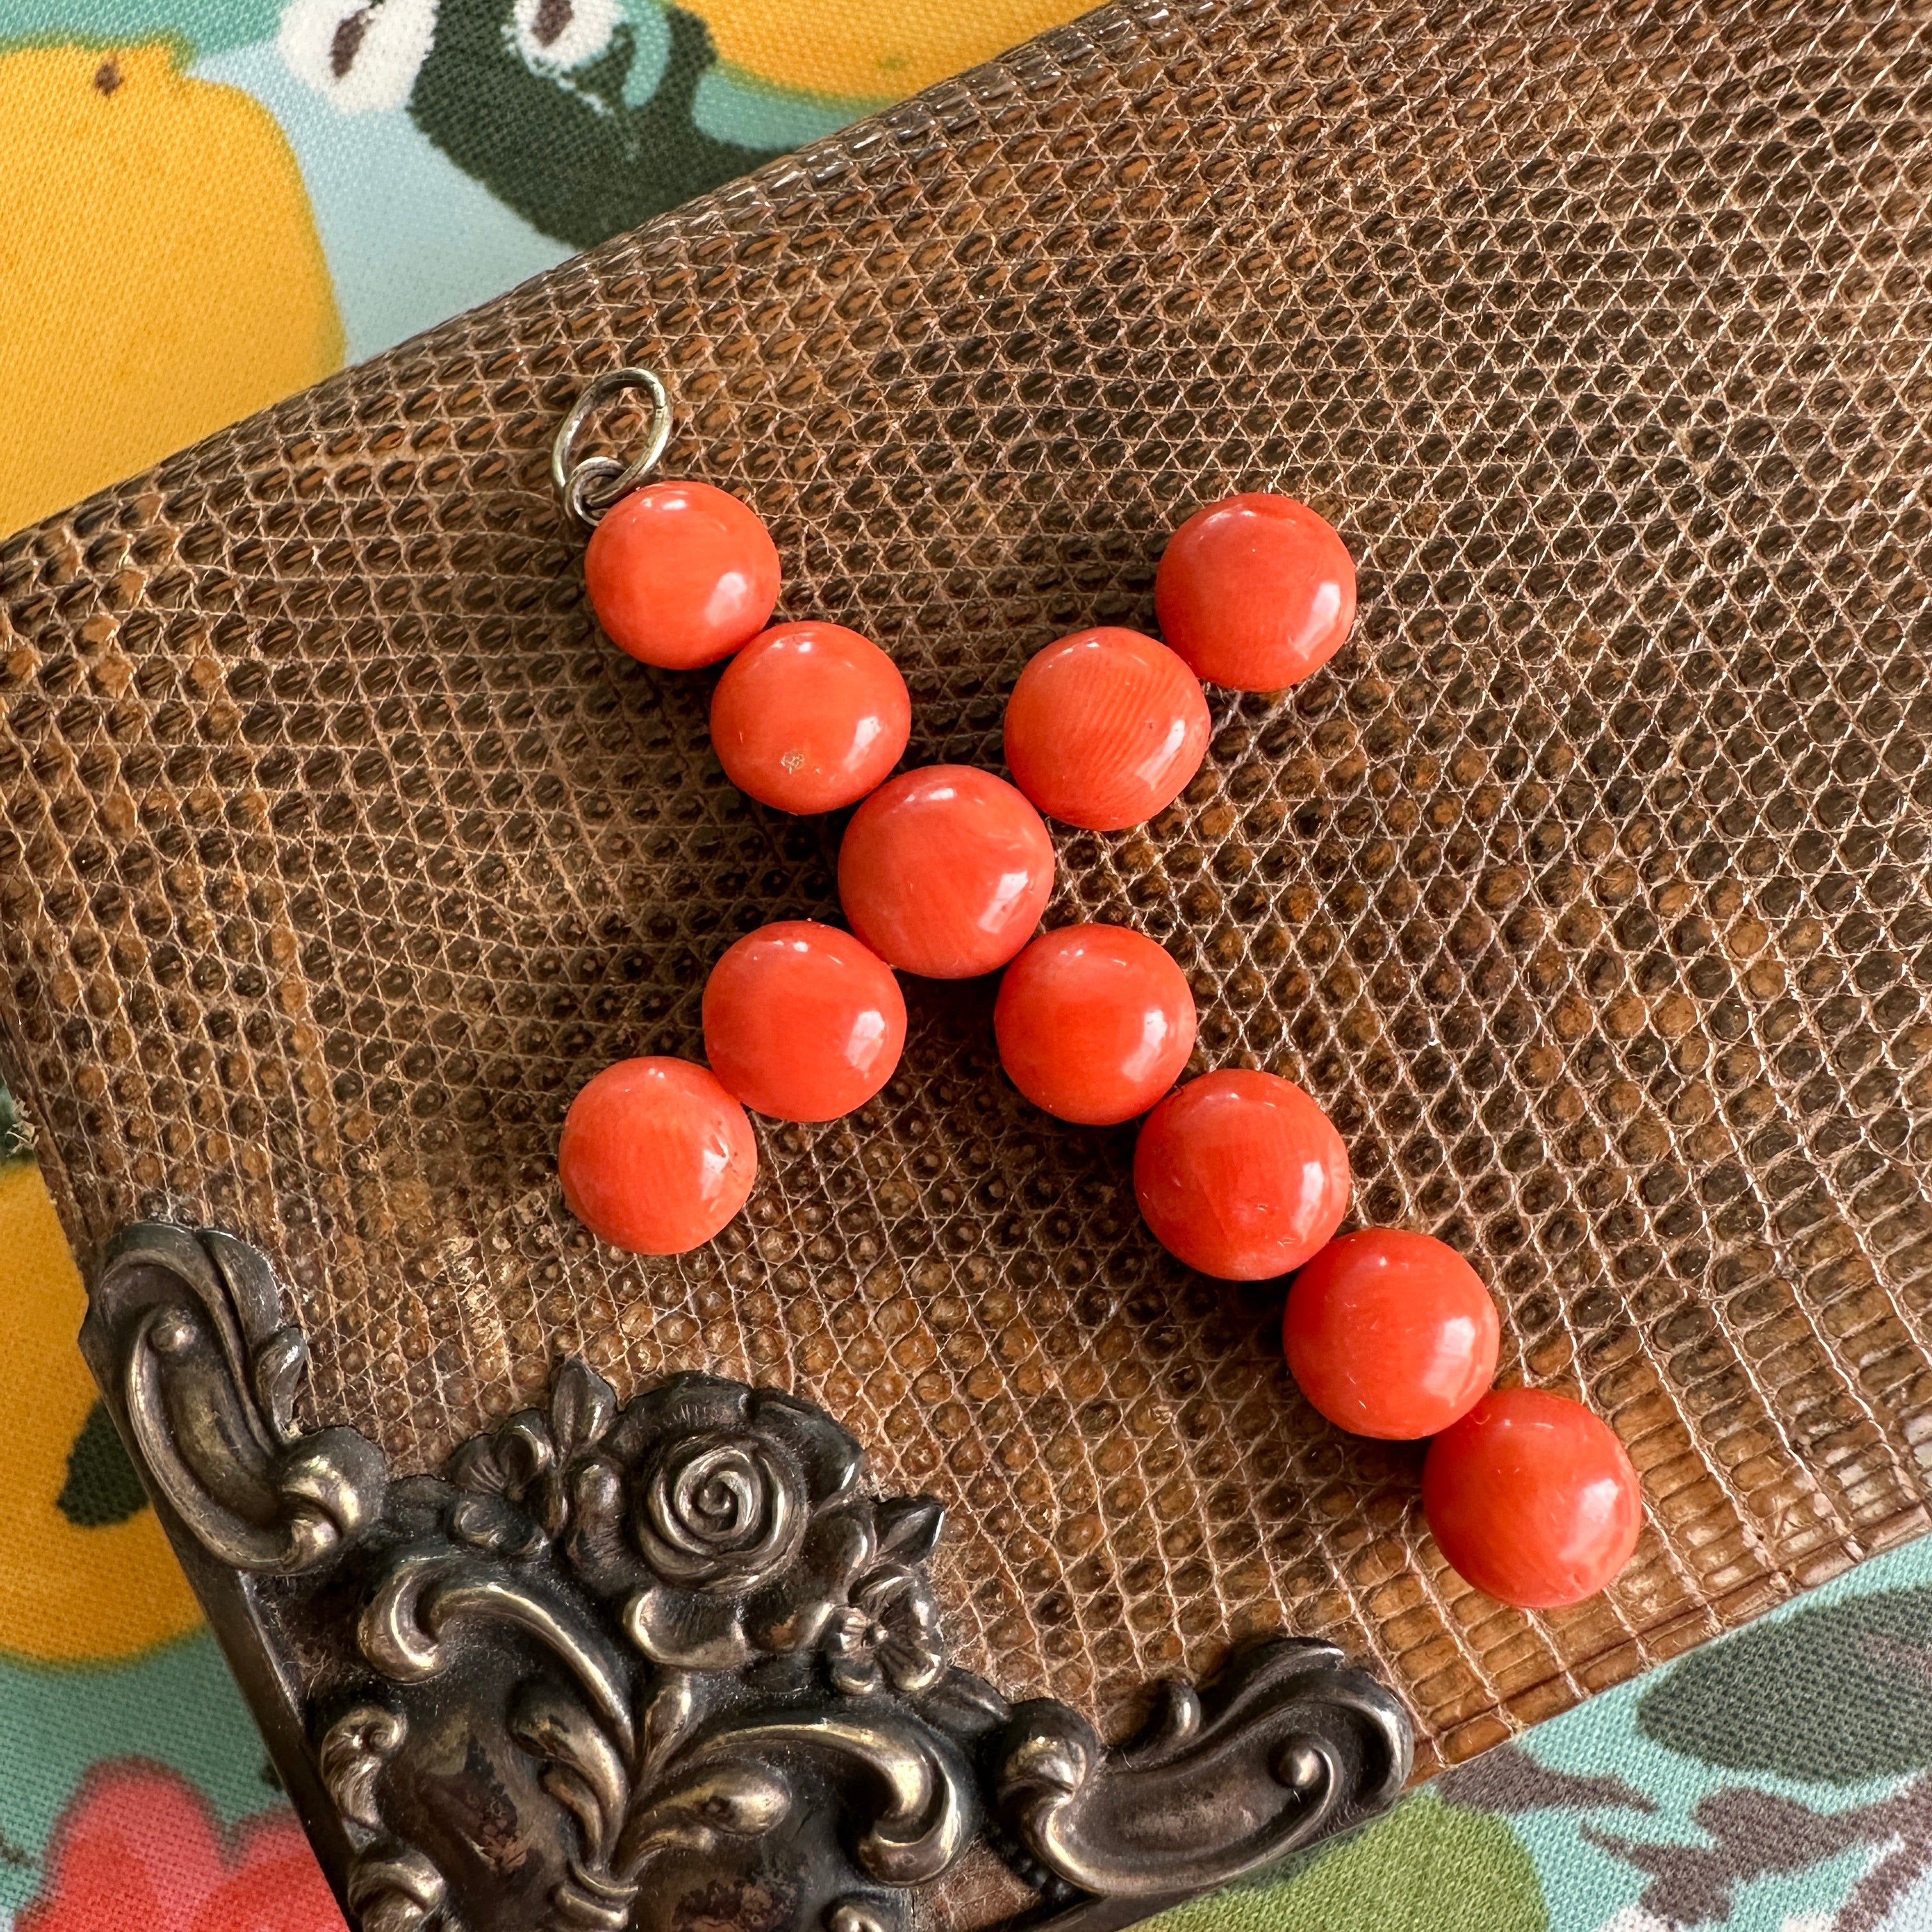 Details:
Stunning Victorian natural red coral and silver cross.  The amazingly matched cabochon coral is a lovely bright red/orange color. Dating from late 1890-1900, this cross is absolutely lovely. The cross measures 2 1/4